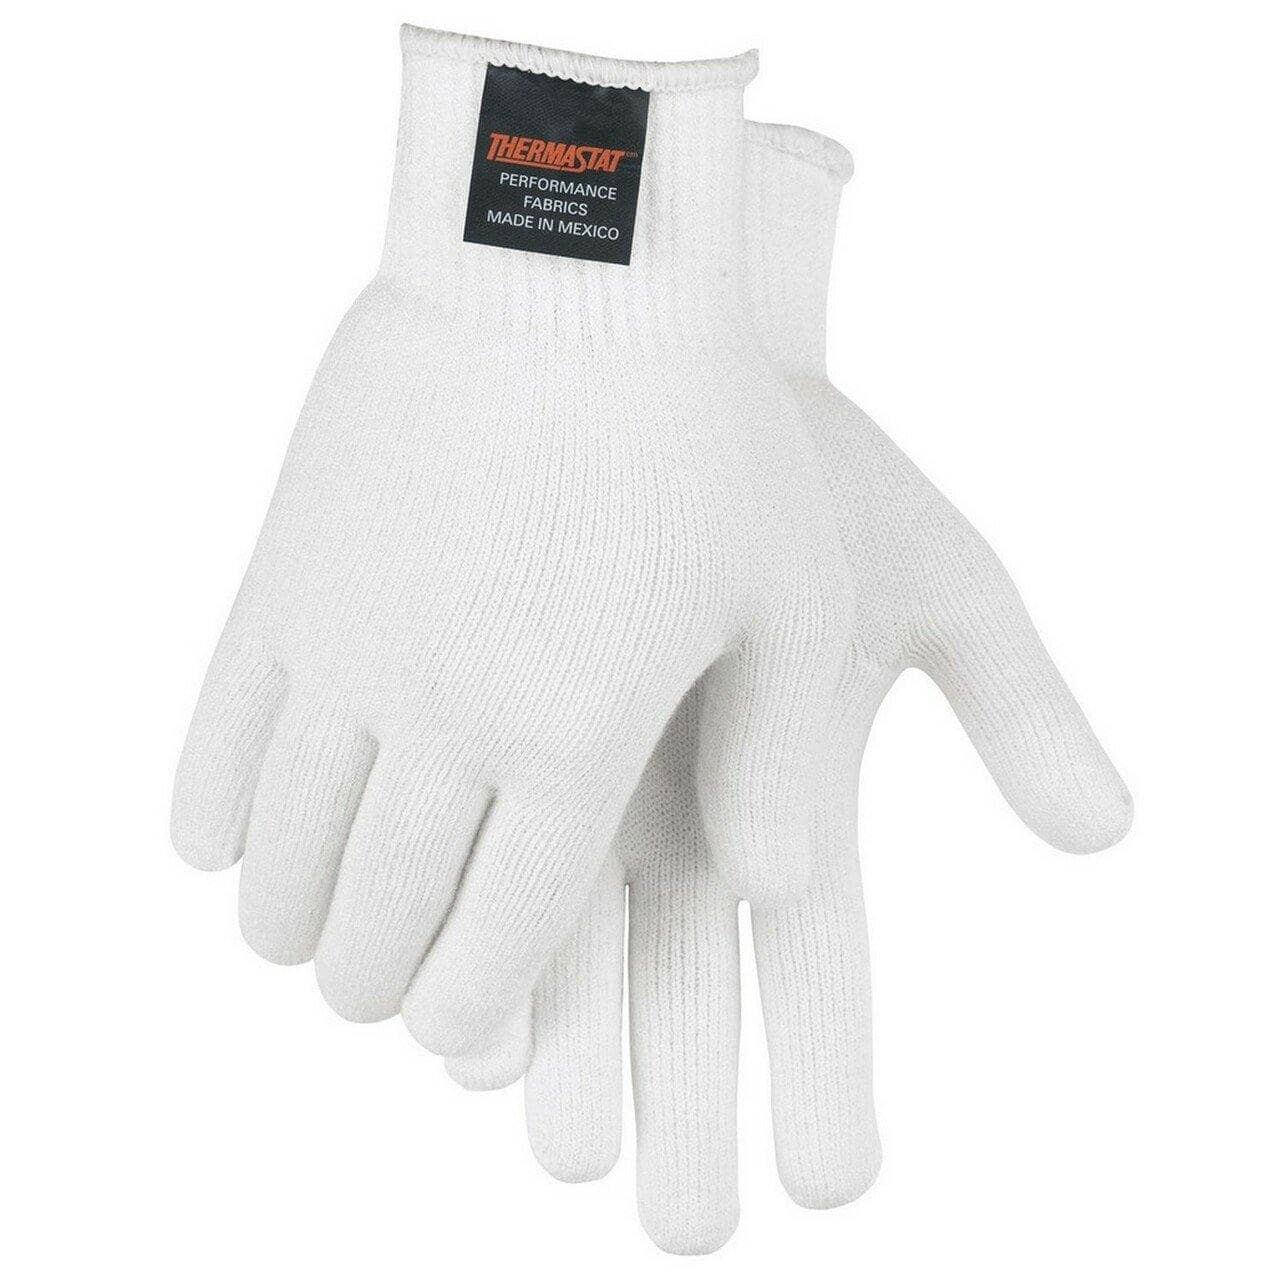 MCR - Thermastat Thermal Insulation Glove, White - Becker Safety and Supply